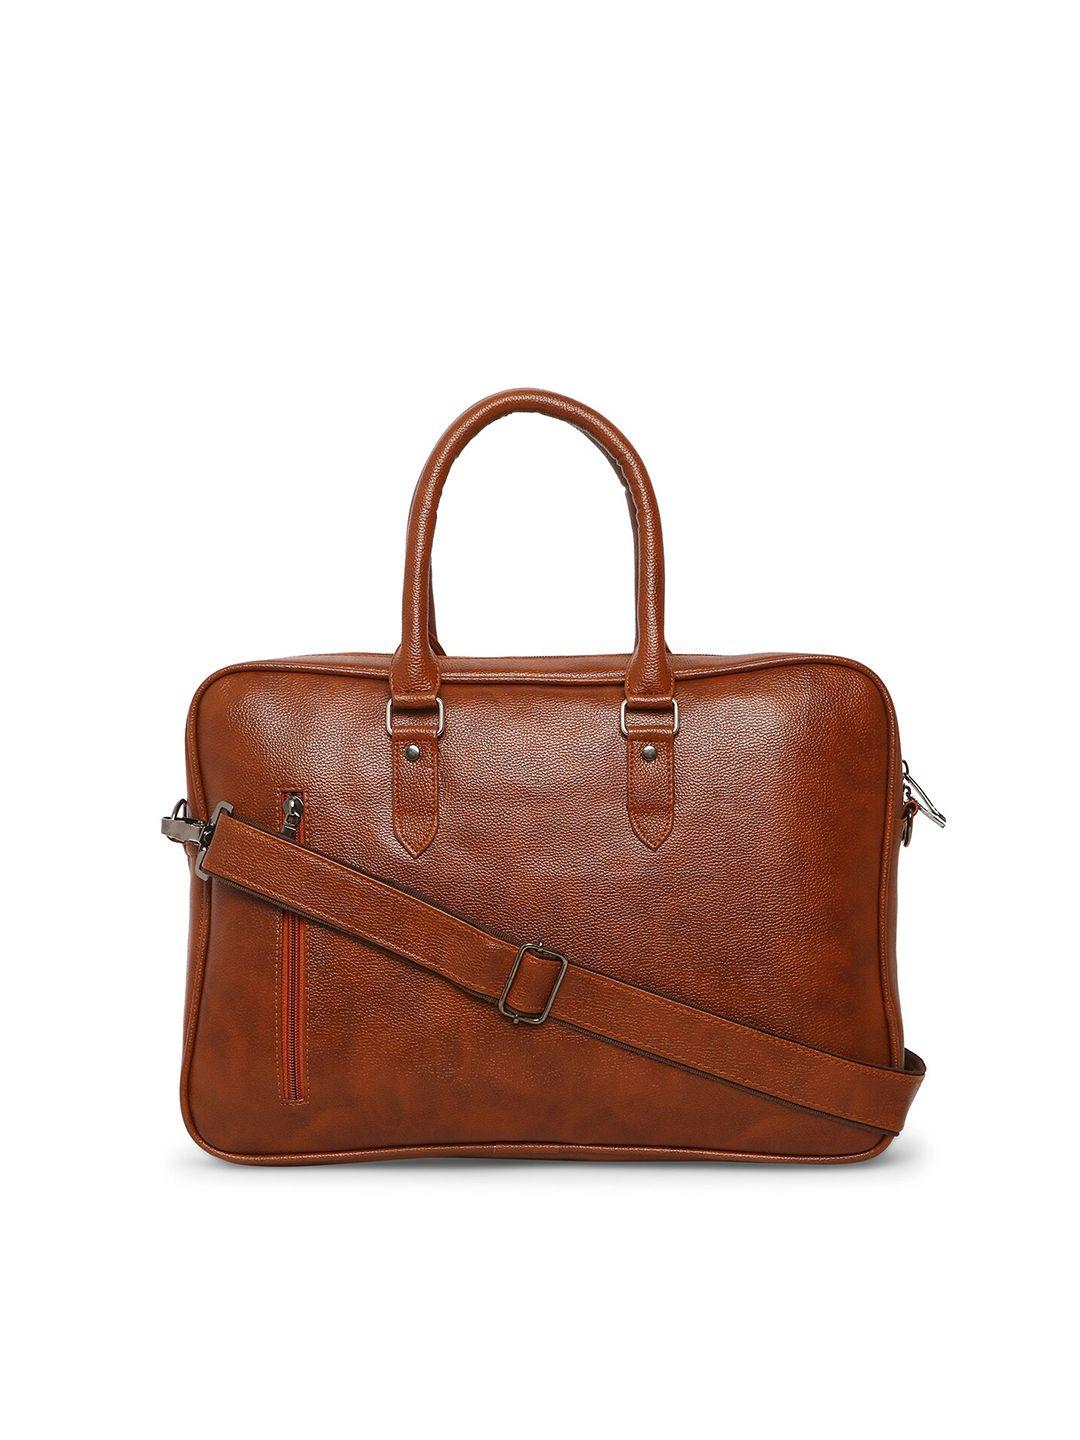 gepack textured leather laptop bag